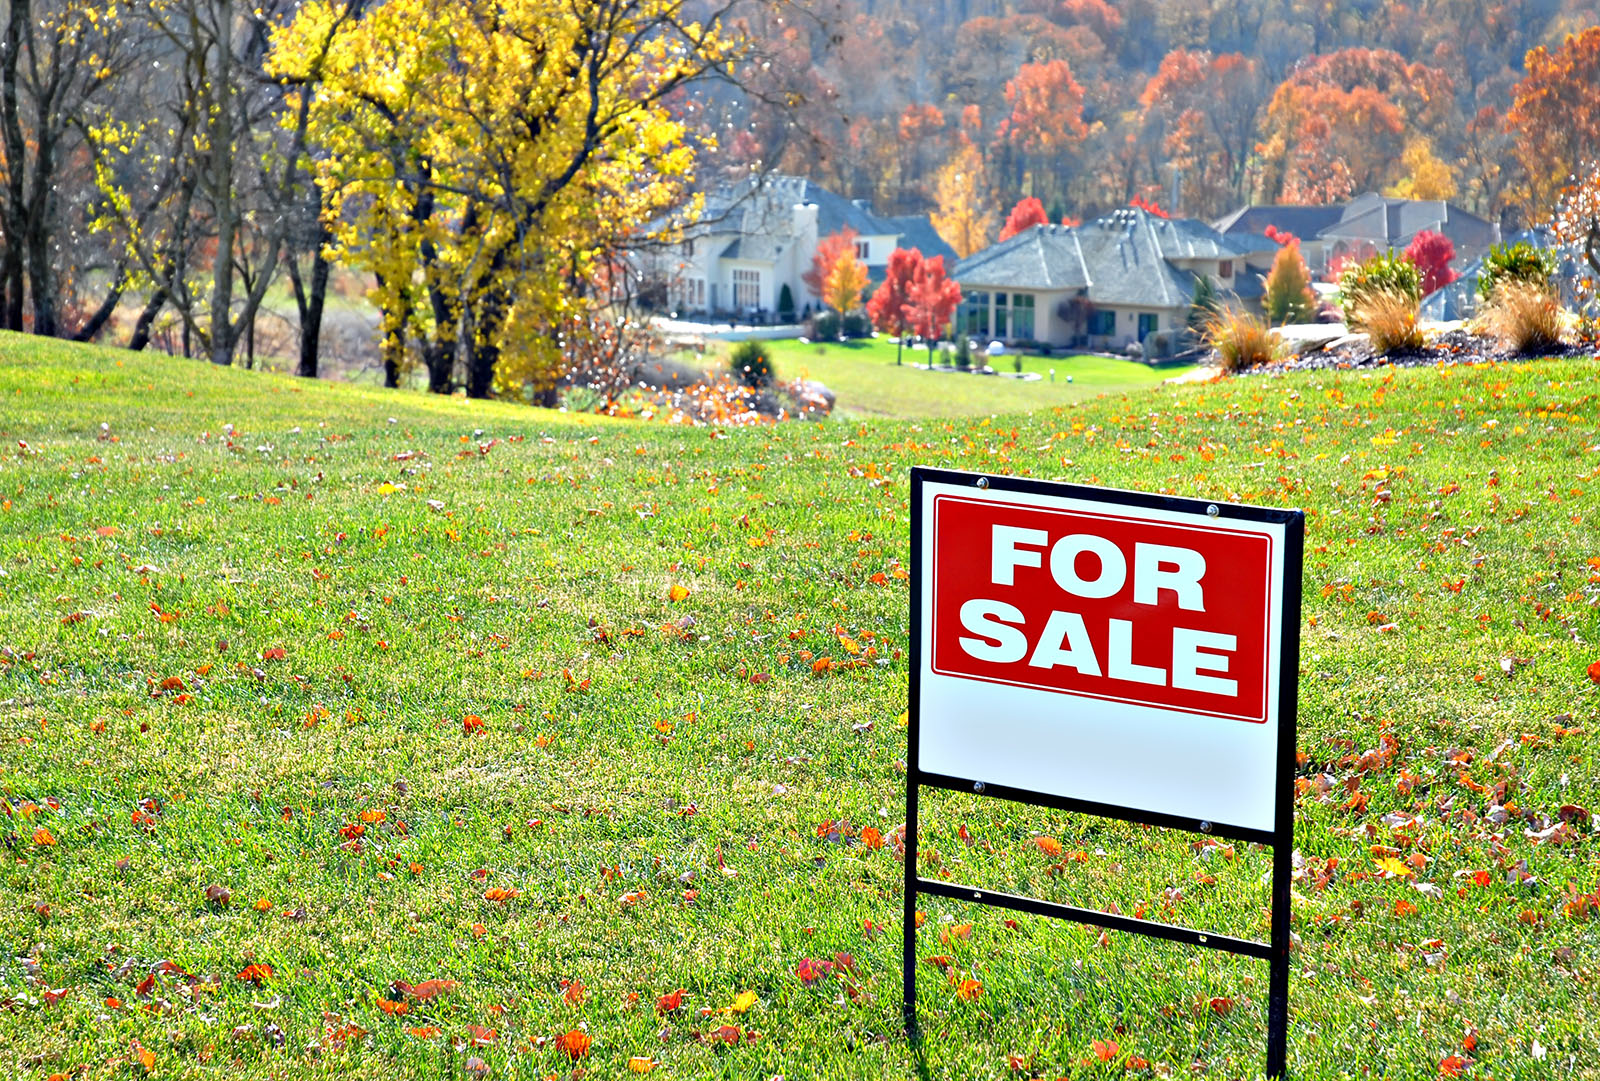 CFor sale sign in grass lot